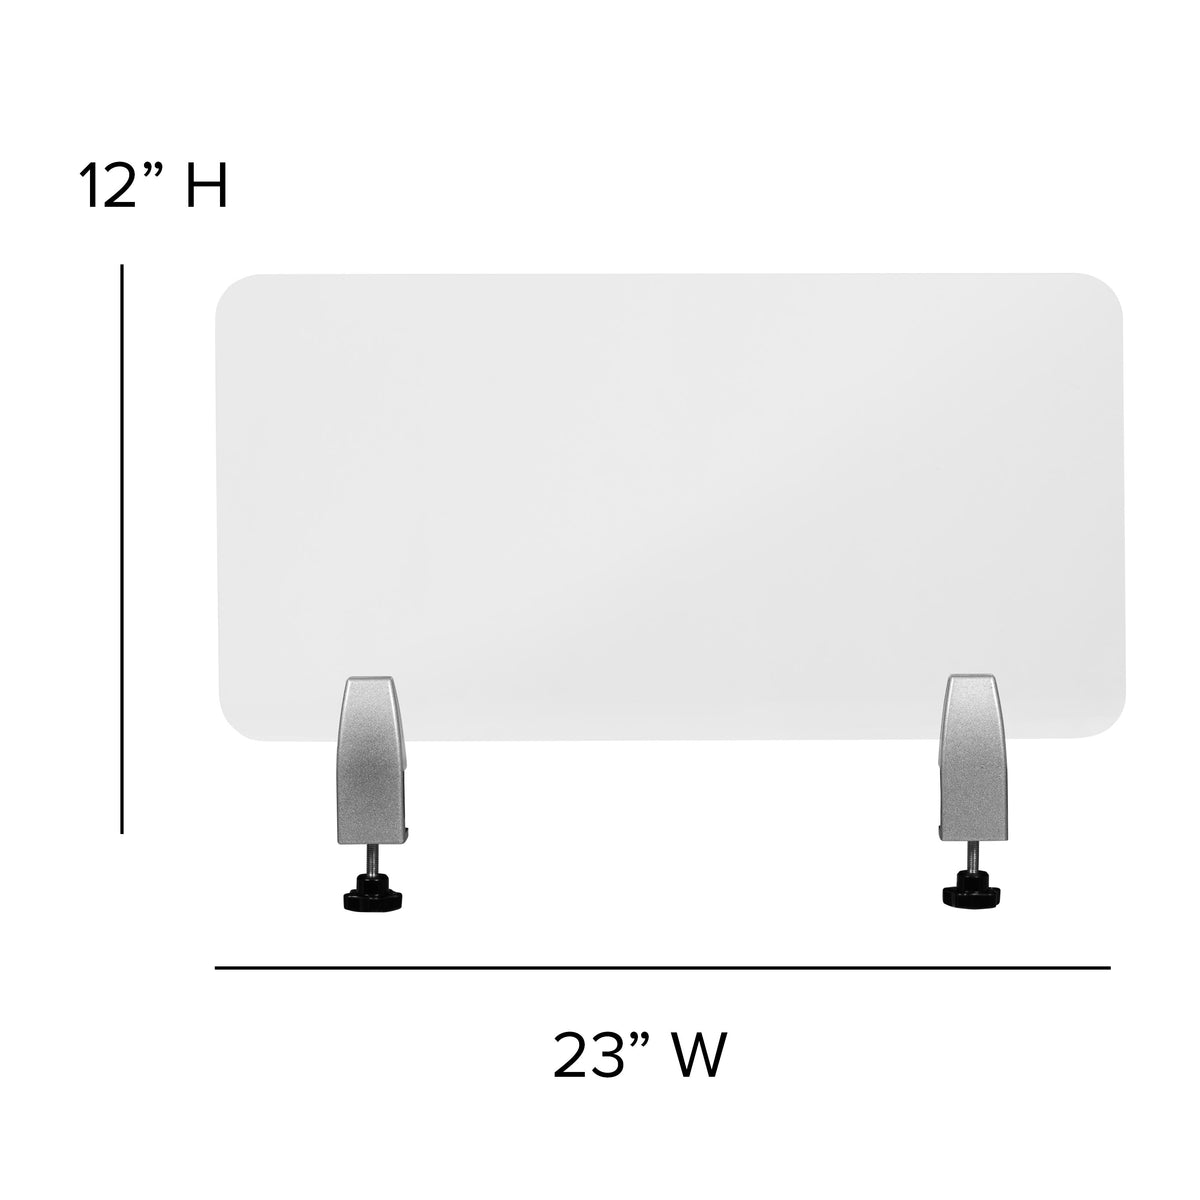 23"L x 12"H |#| Clear Acrylic Desk Partition, 12"H x 23"L (Installation Hardware Included)